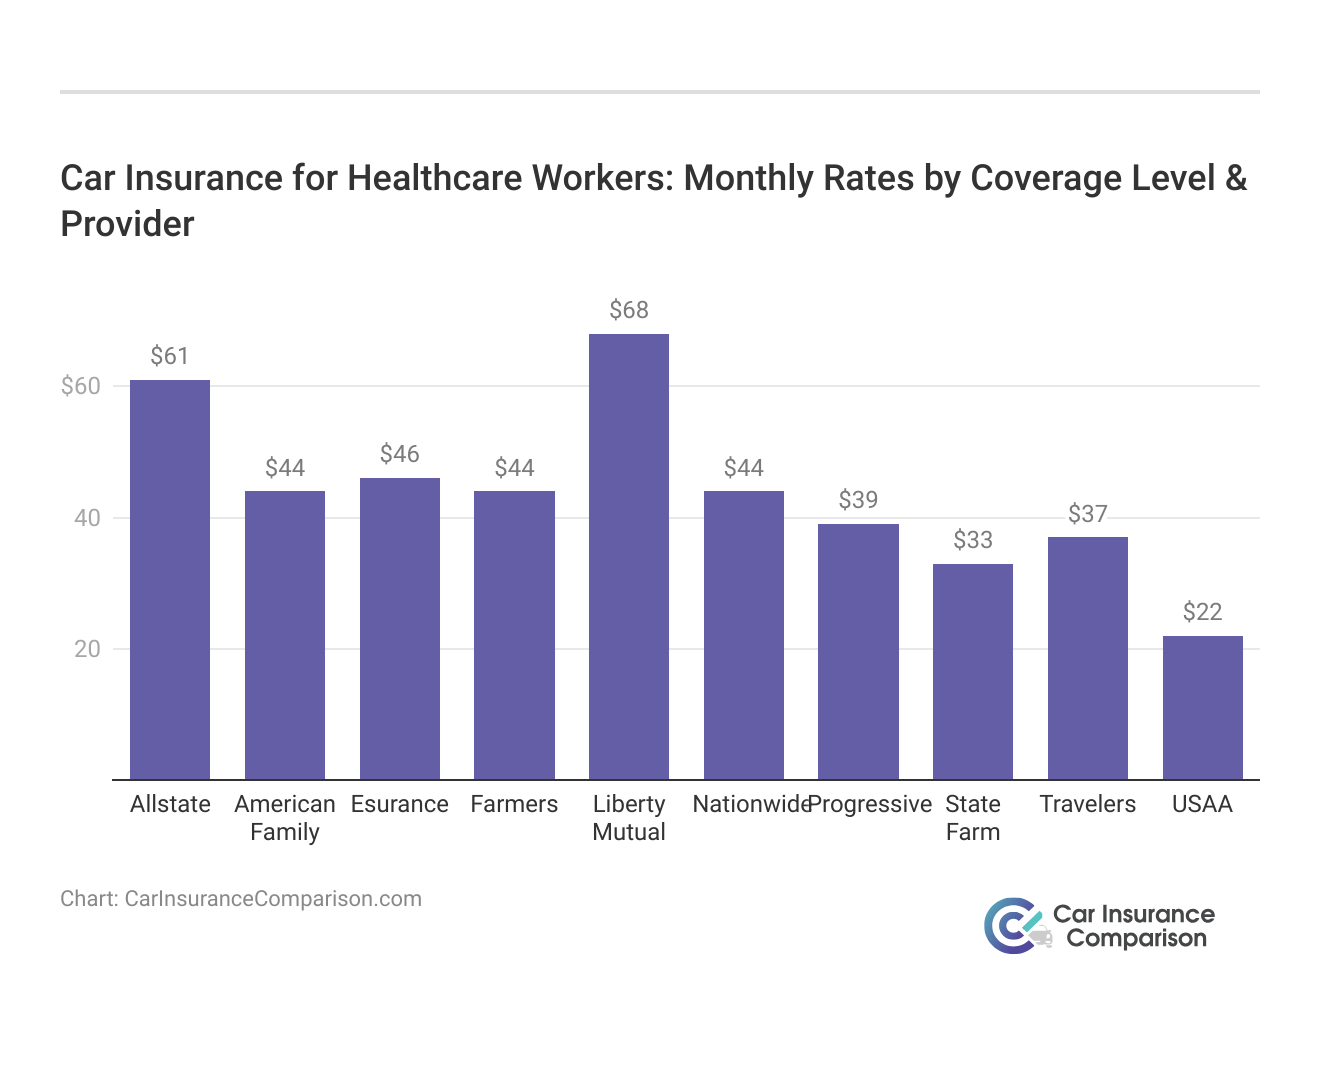 <h3>Car Insurance for Healthcare Workers: Monthly Rates by Coverage Level & Provider</h3>